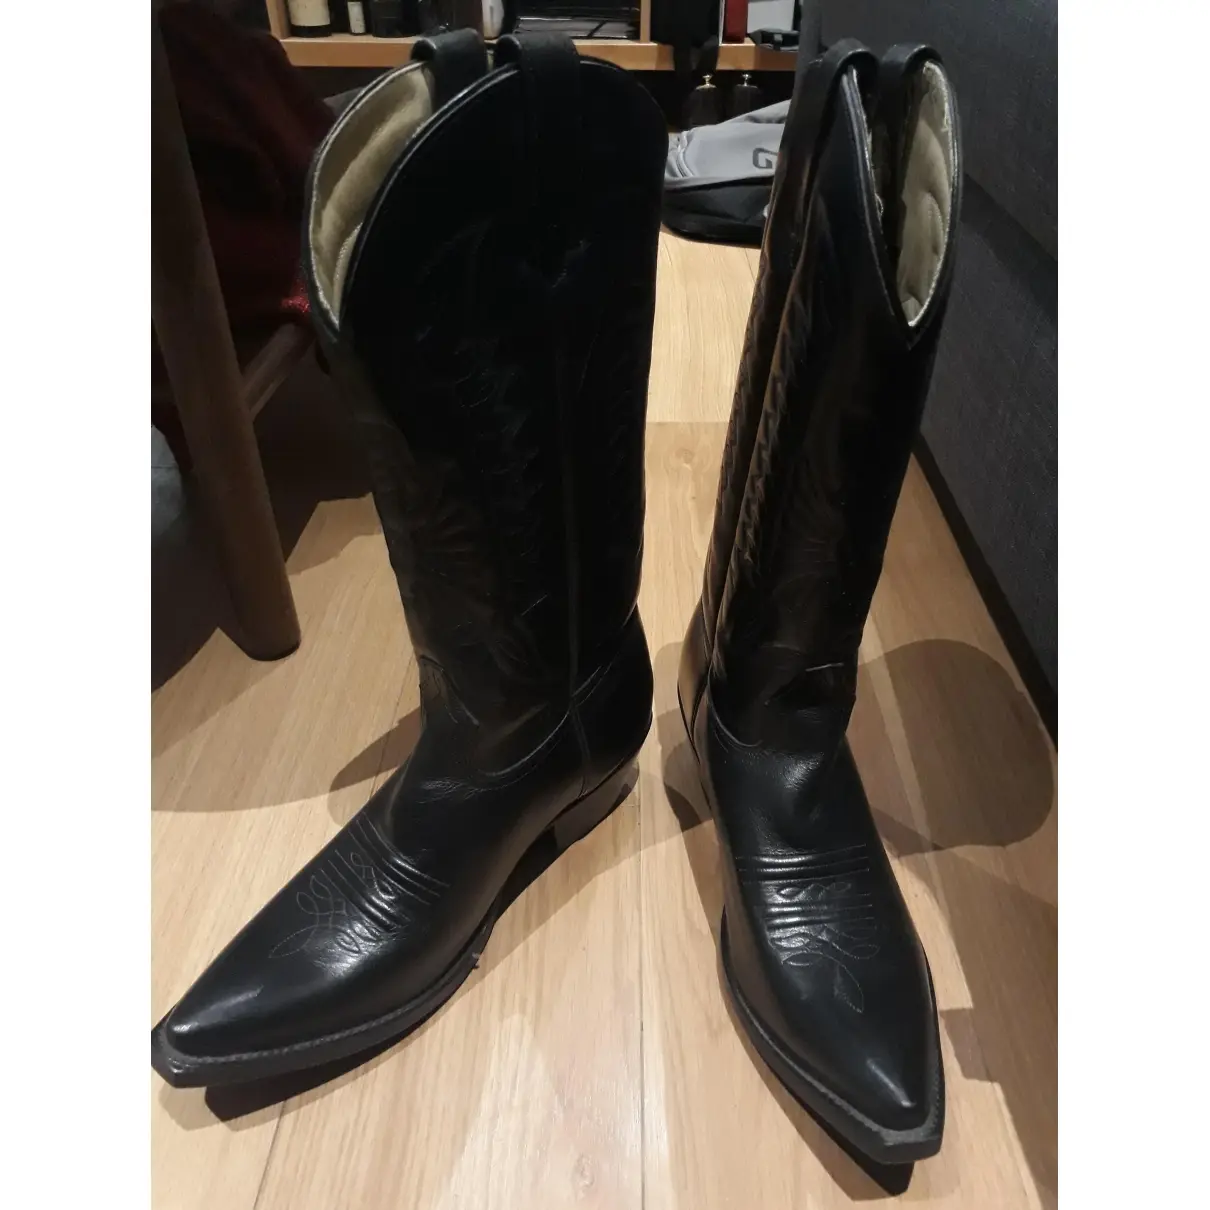 Mexicana Leather boots for sale